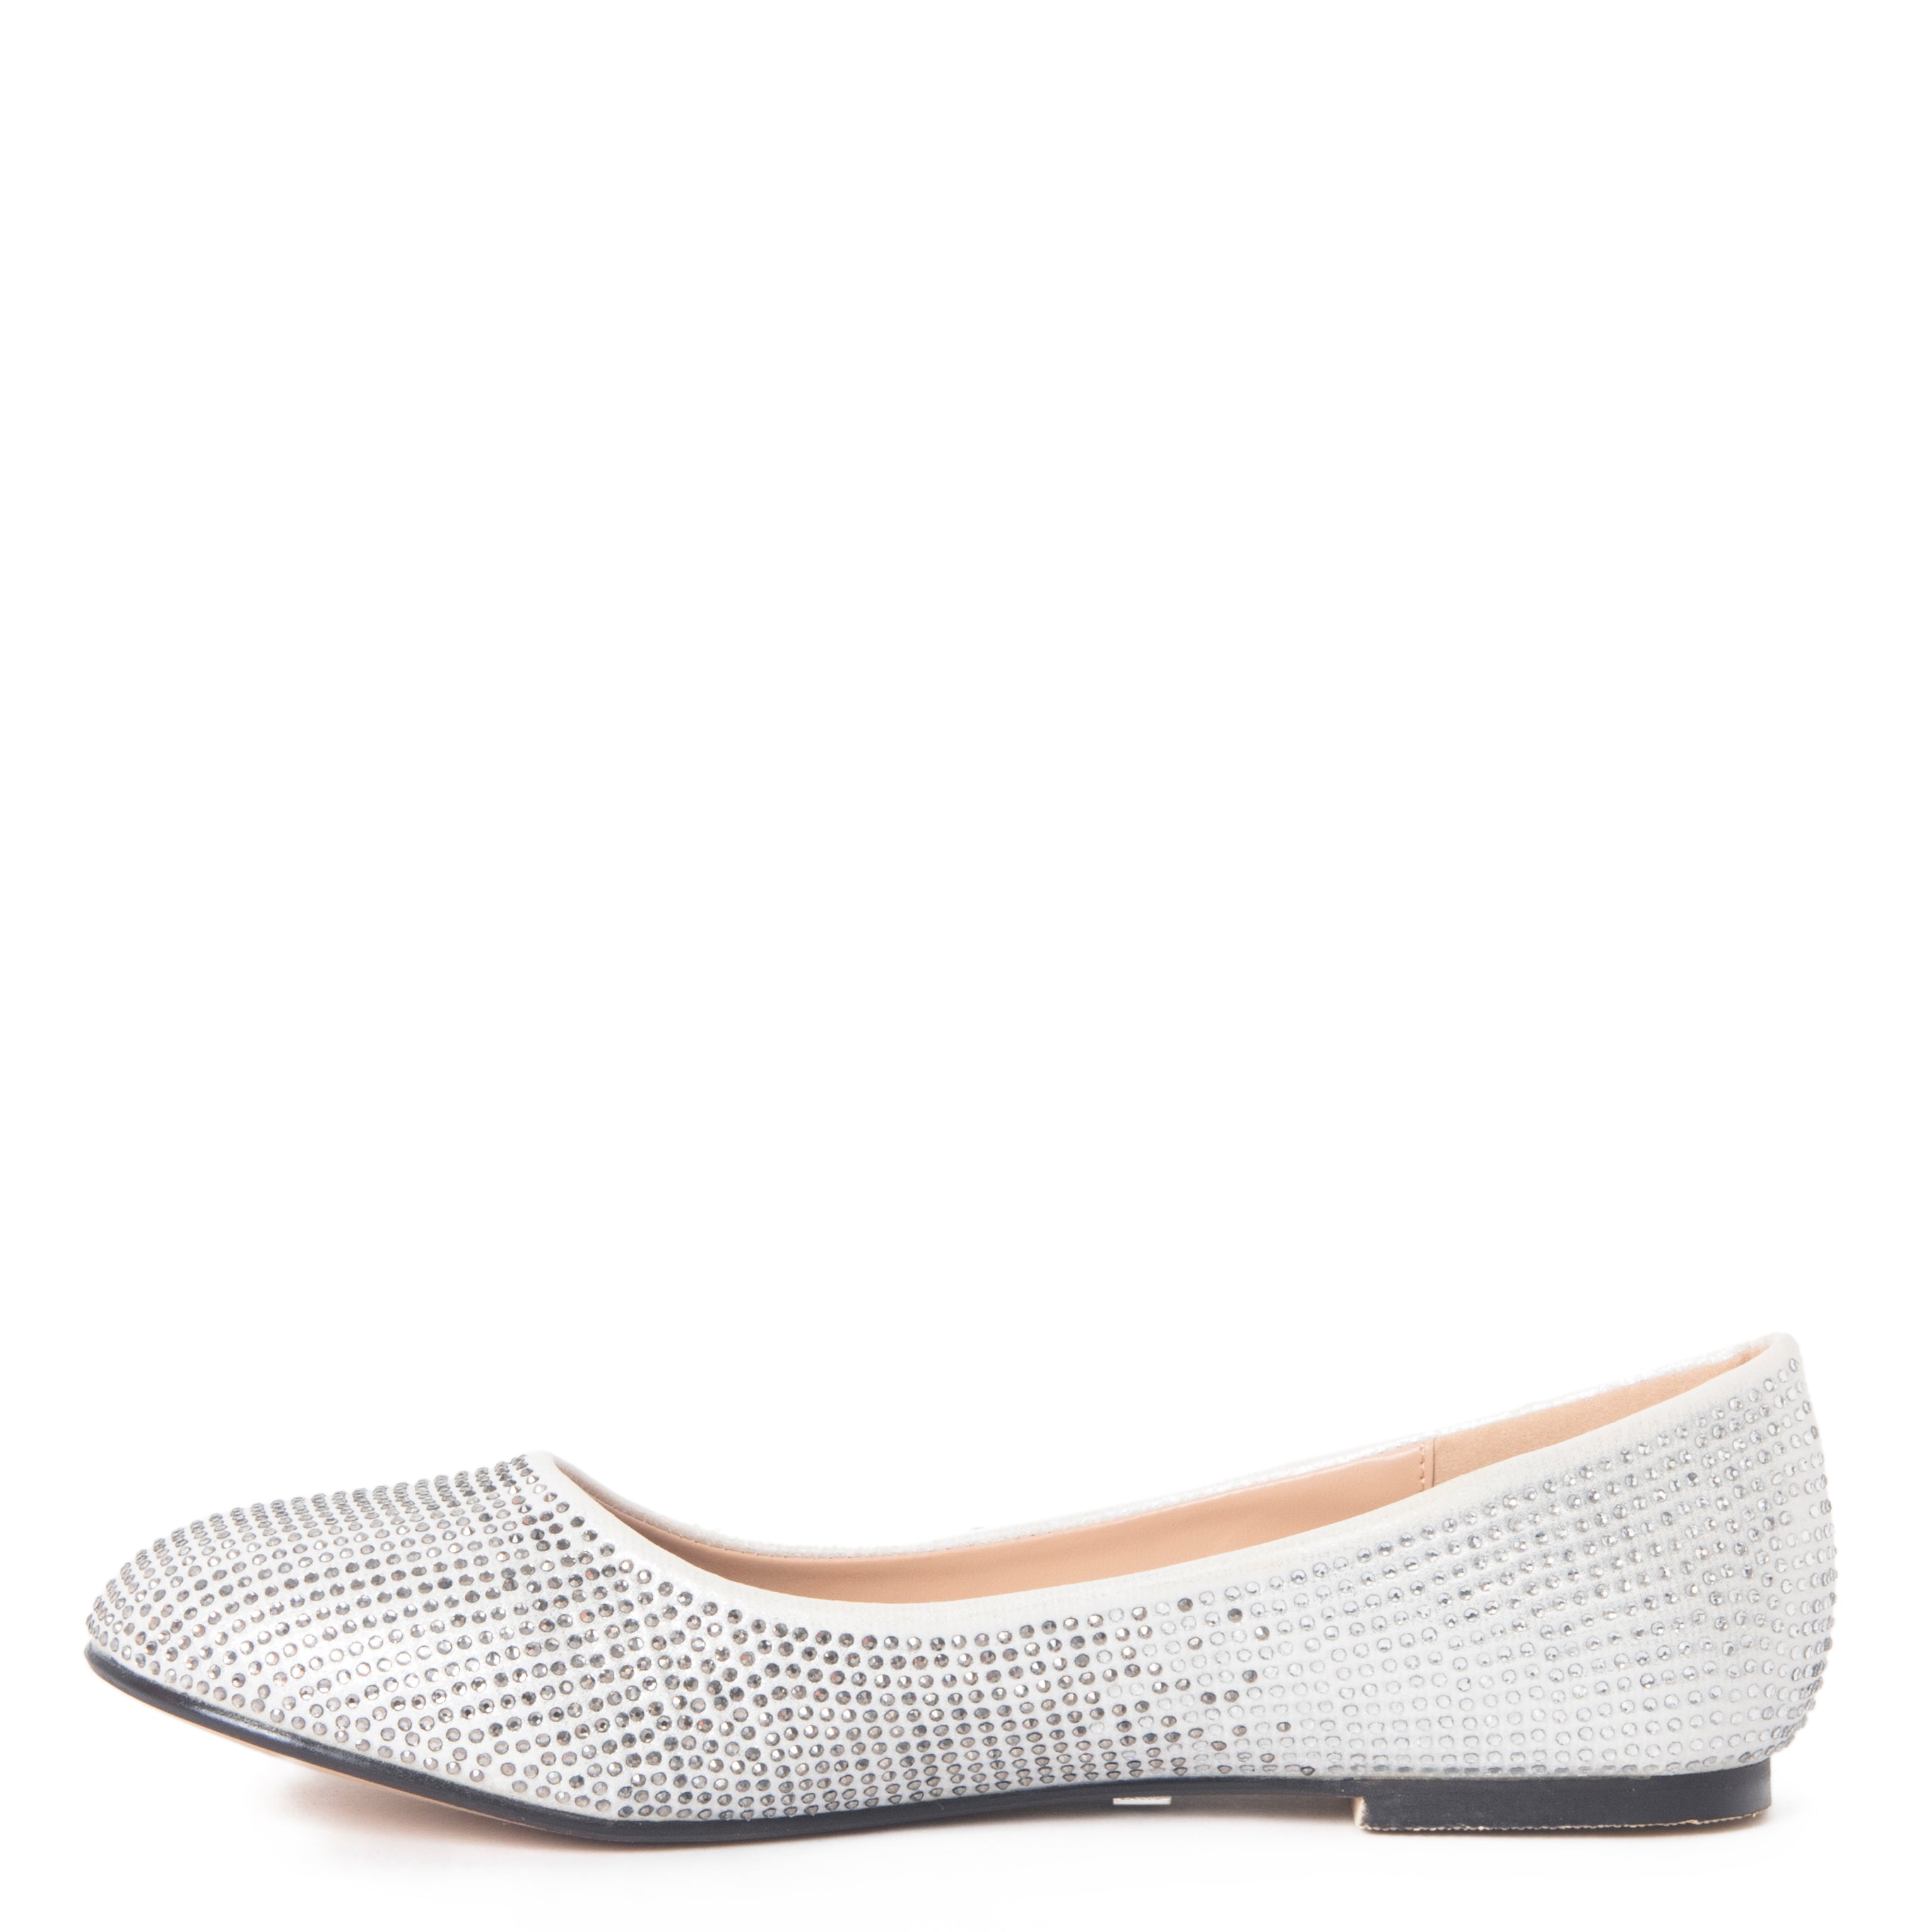 BELLA POINTY TOE PUMP FLATS WITH SPARKLY RHINESTONE DETAILING